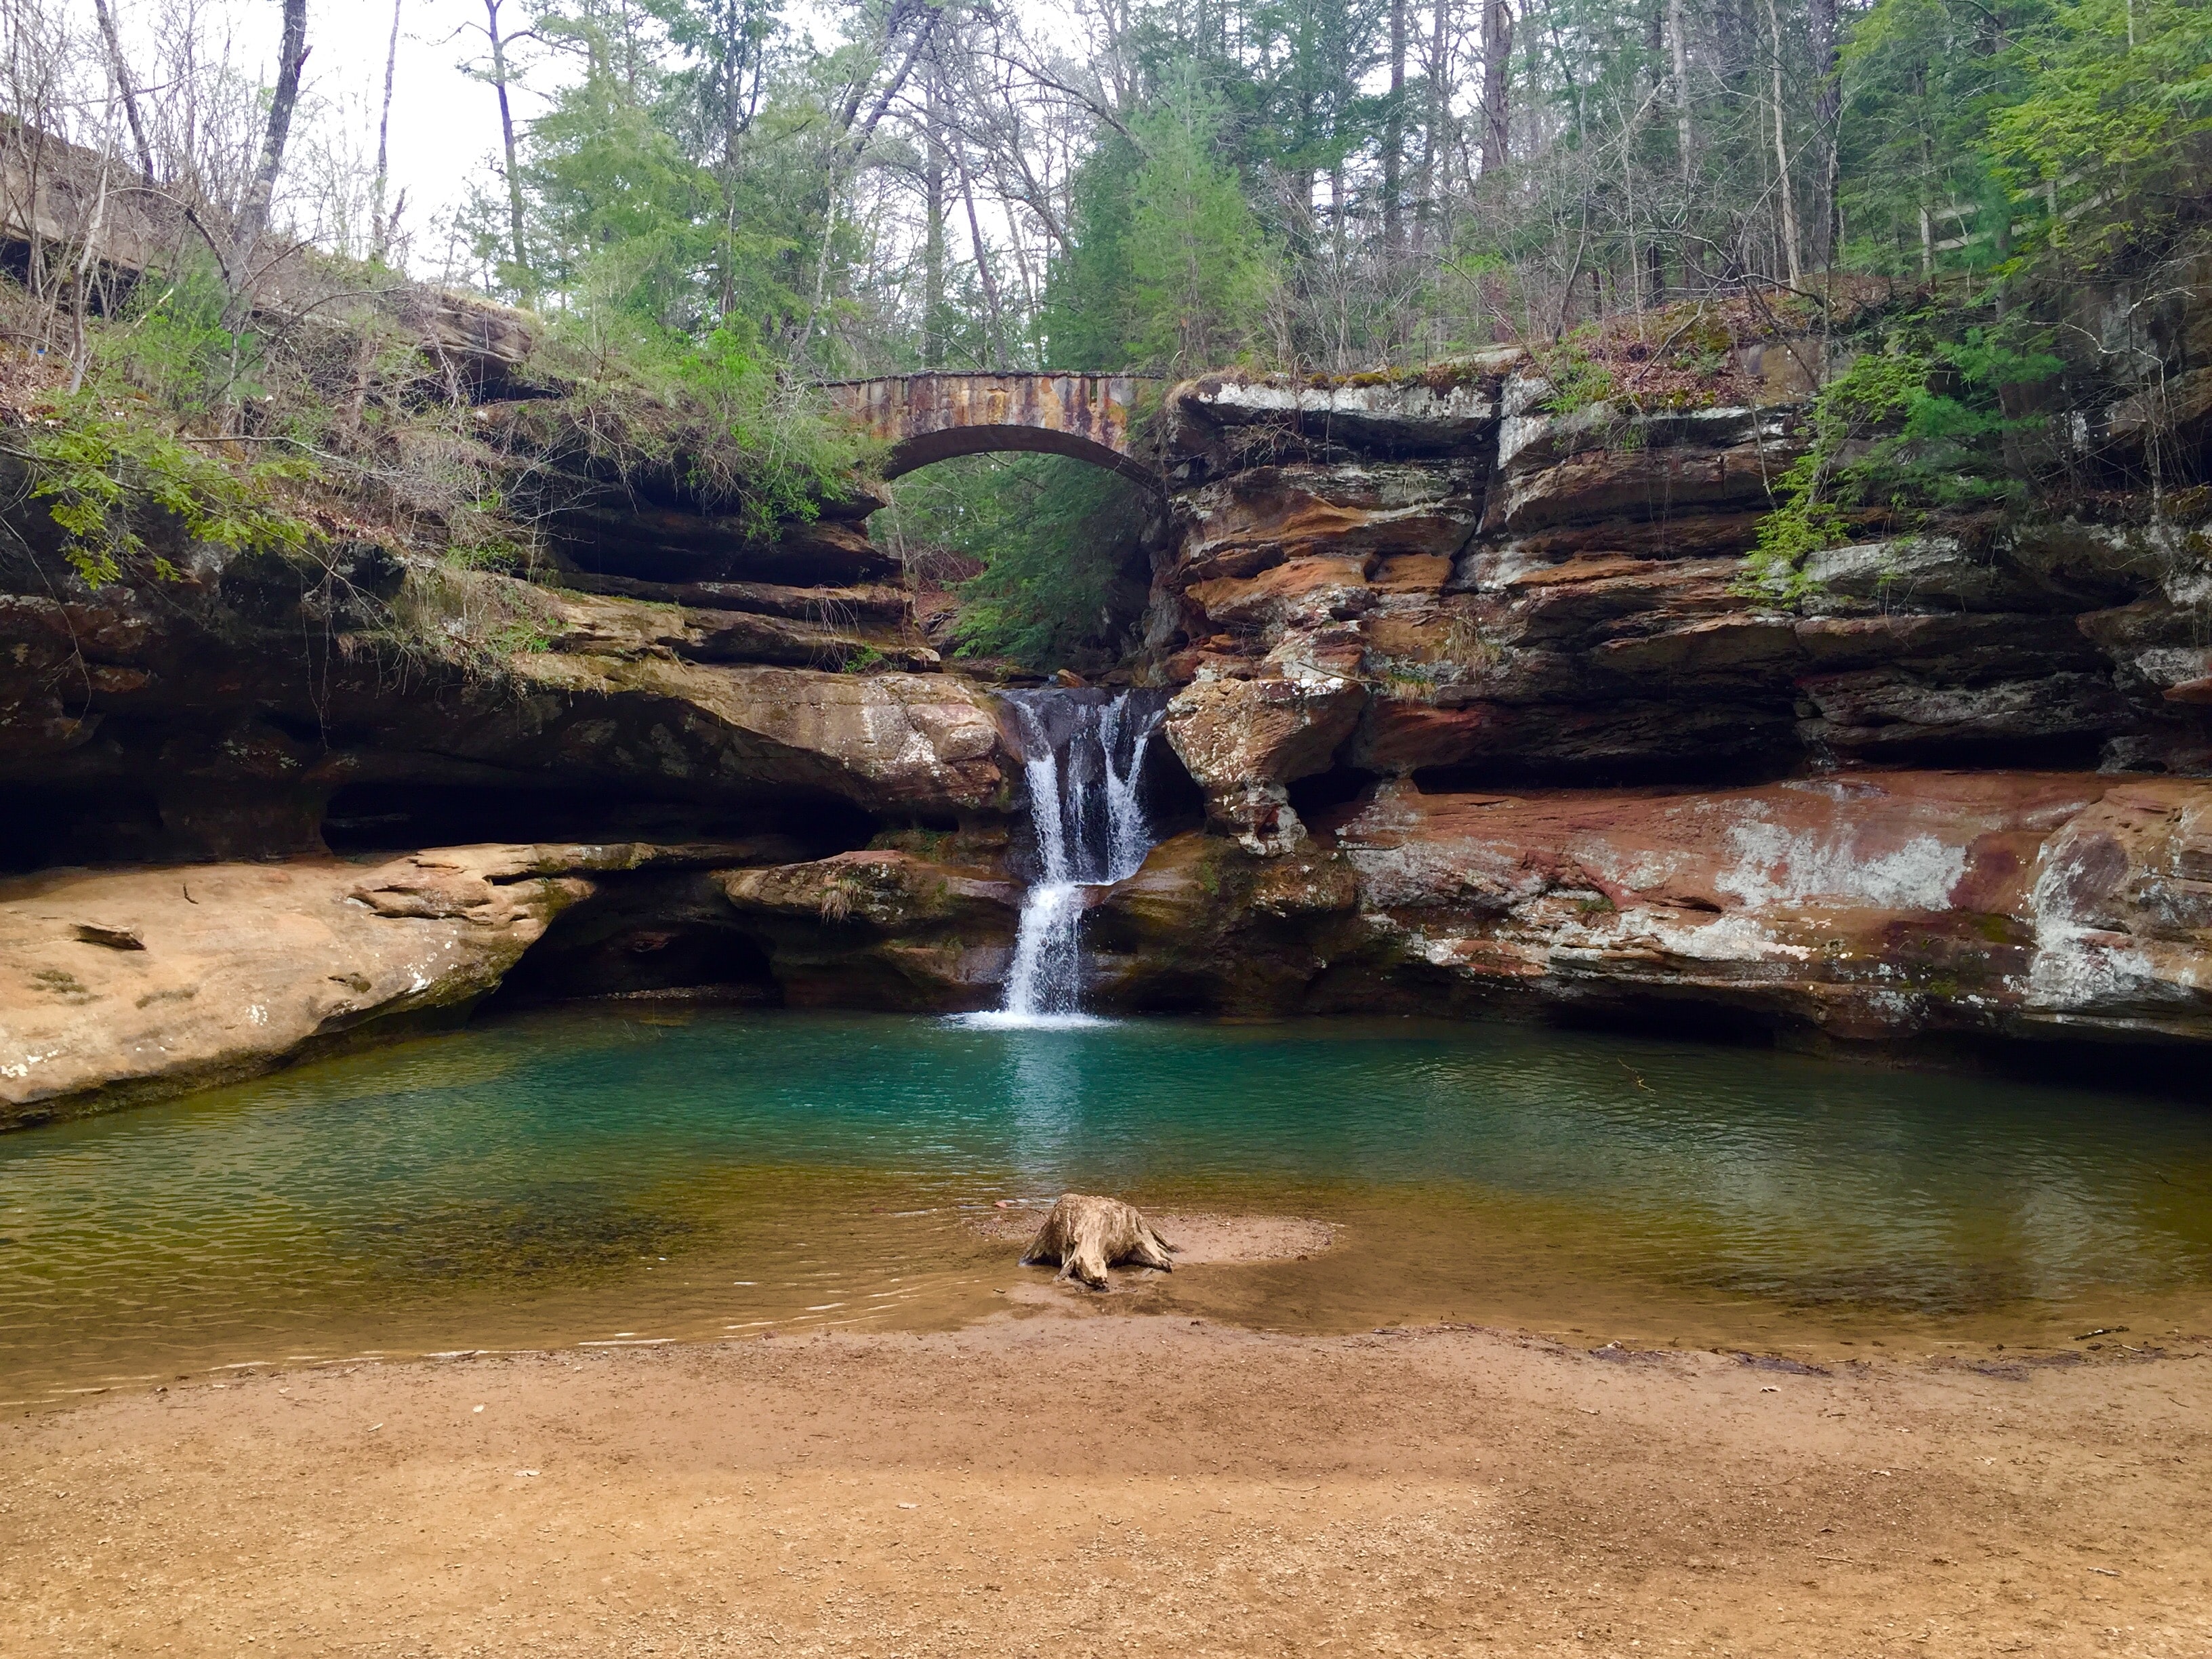 Planning a Trip to Hocking Hills State Park